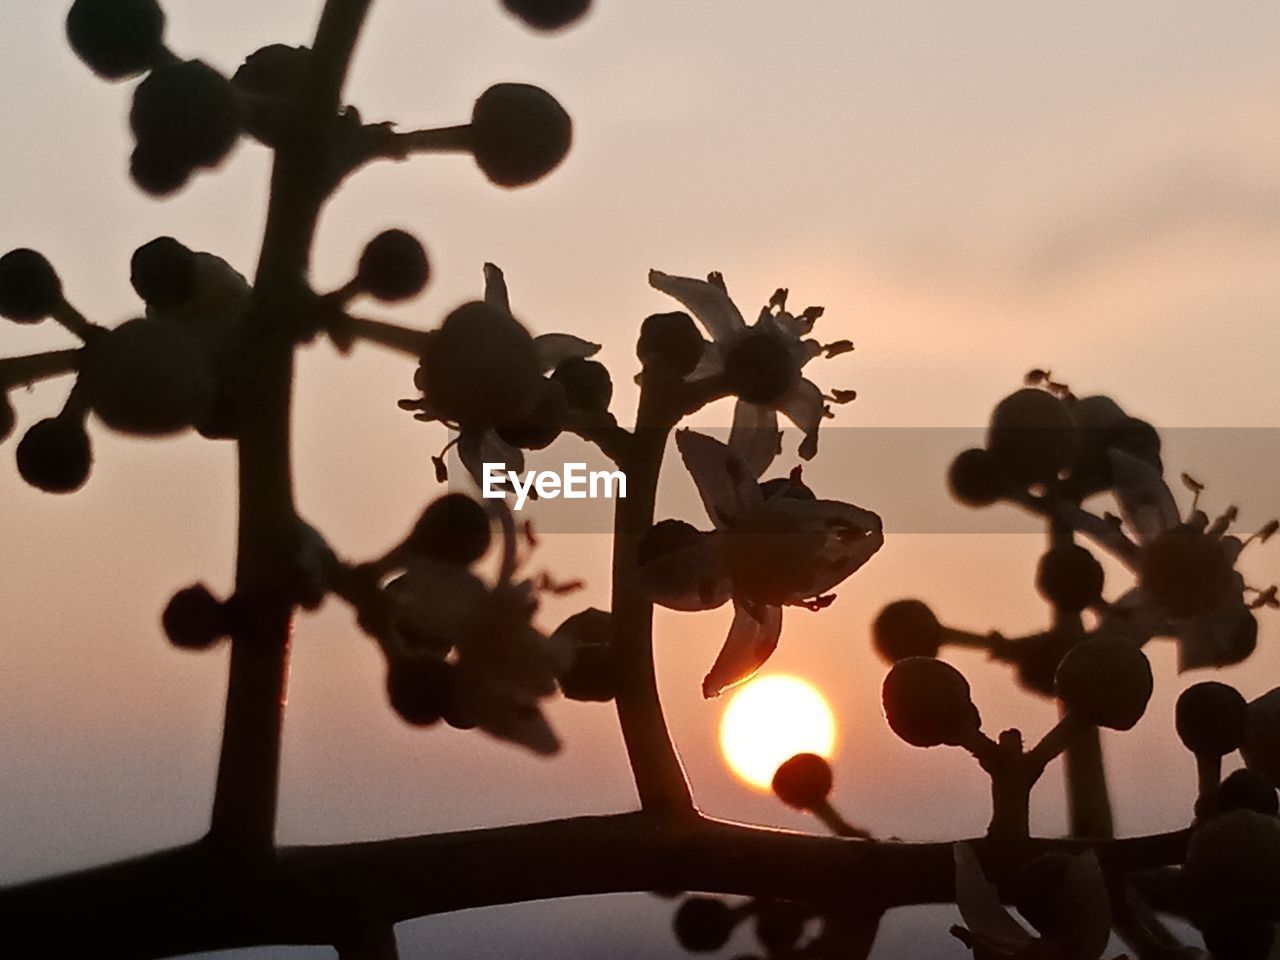 CLOSE-UP OF SILHOUETTE FLOWERING PLANT AGAINST SKY DURING SUNSET